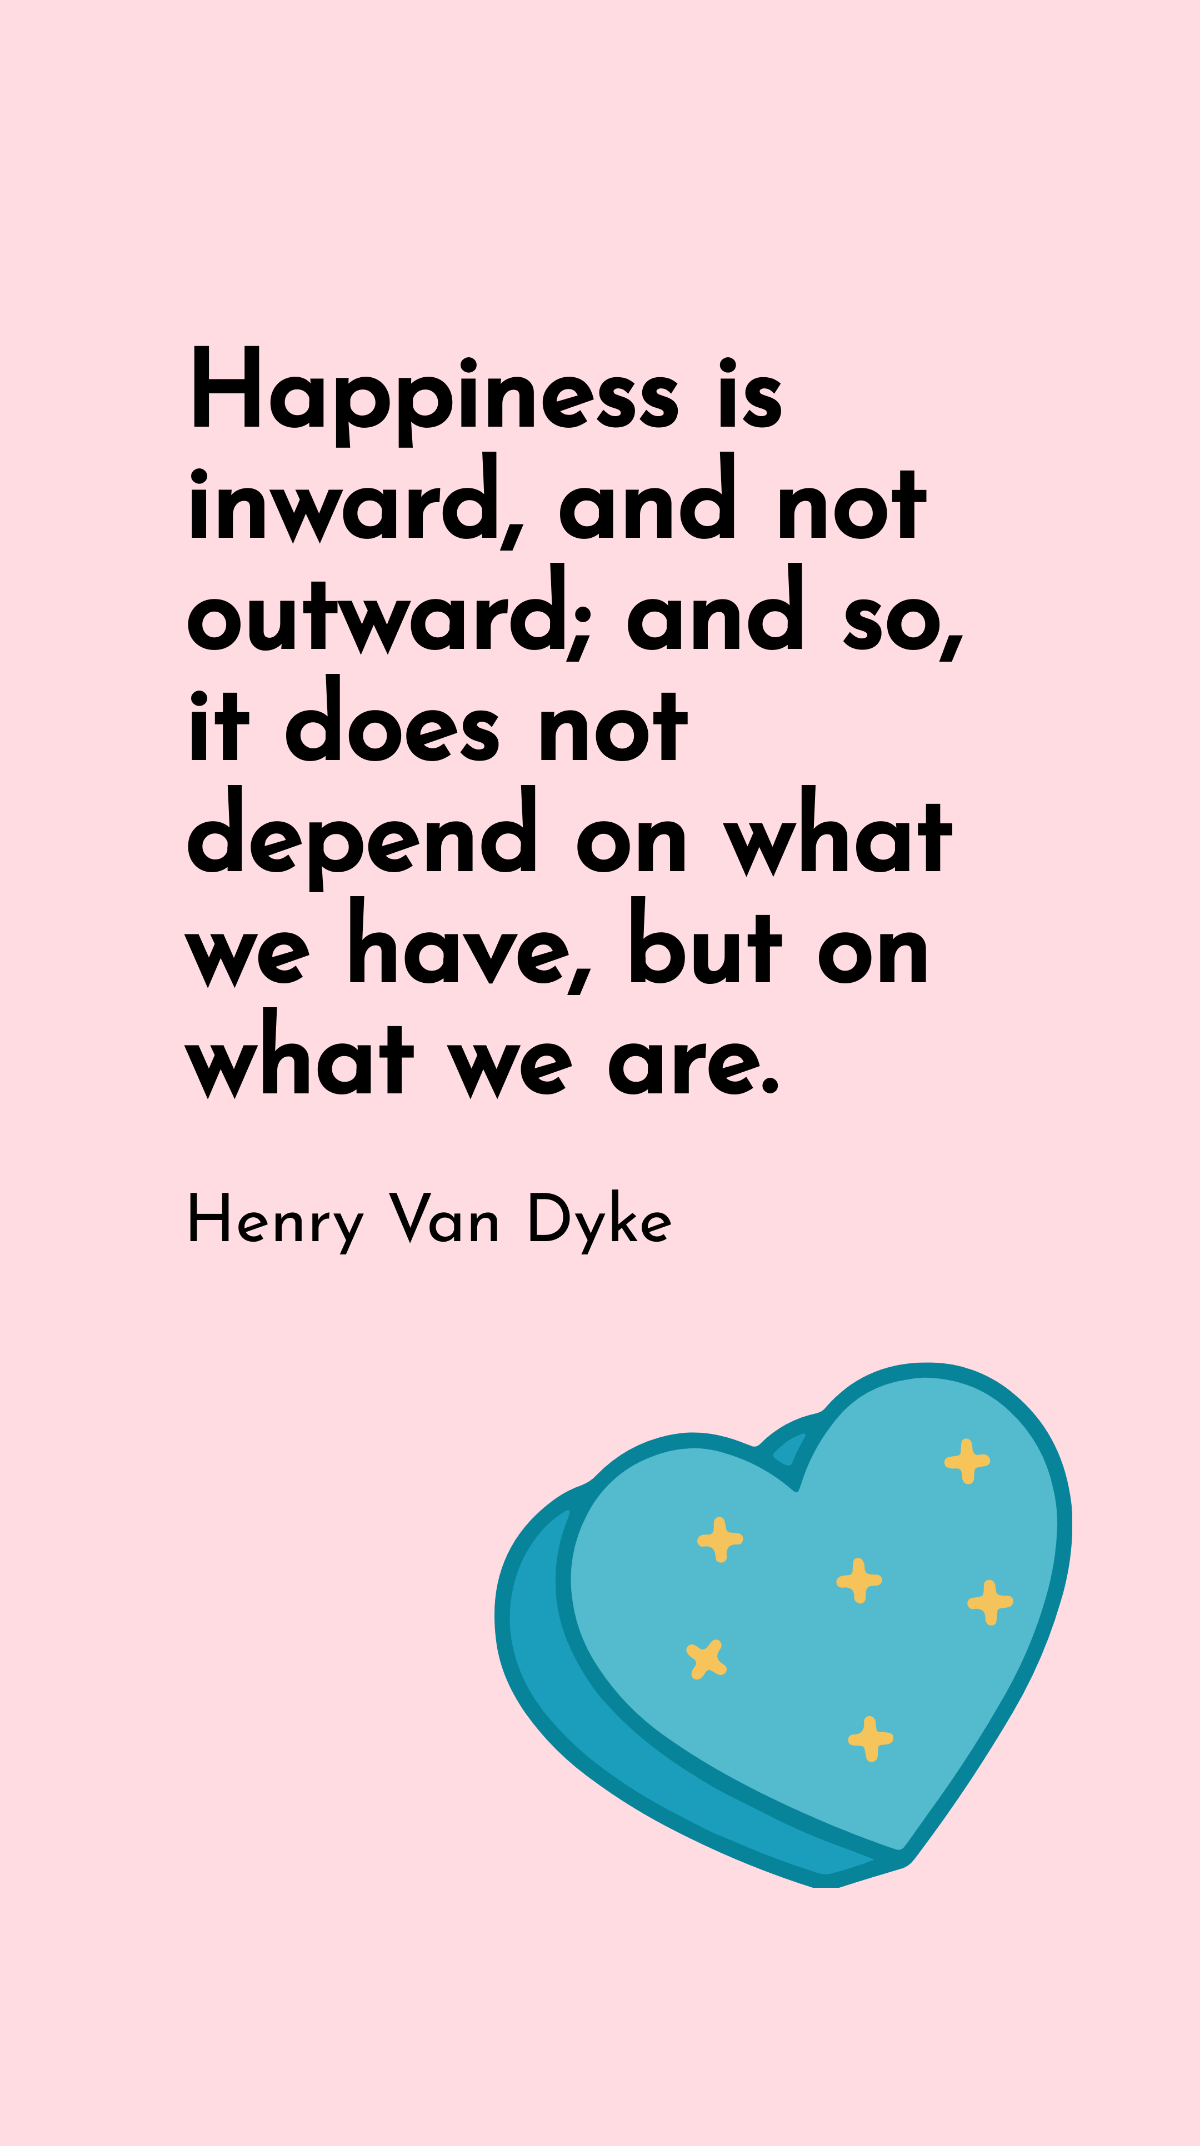 Henry Van Dyke - Happiness is inward, and not outward; and so, it does not depend on what we have, but on what we are. Template